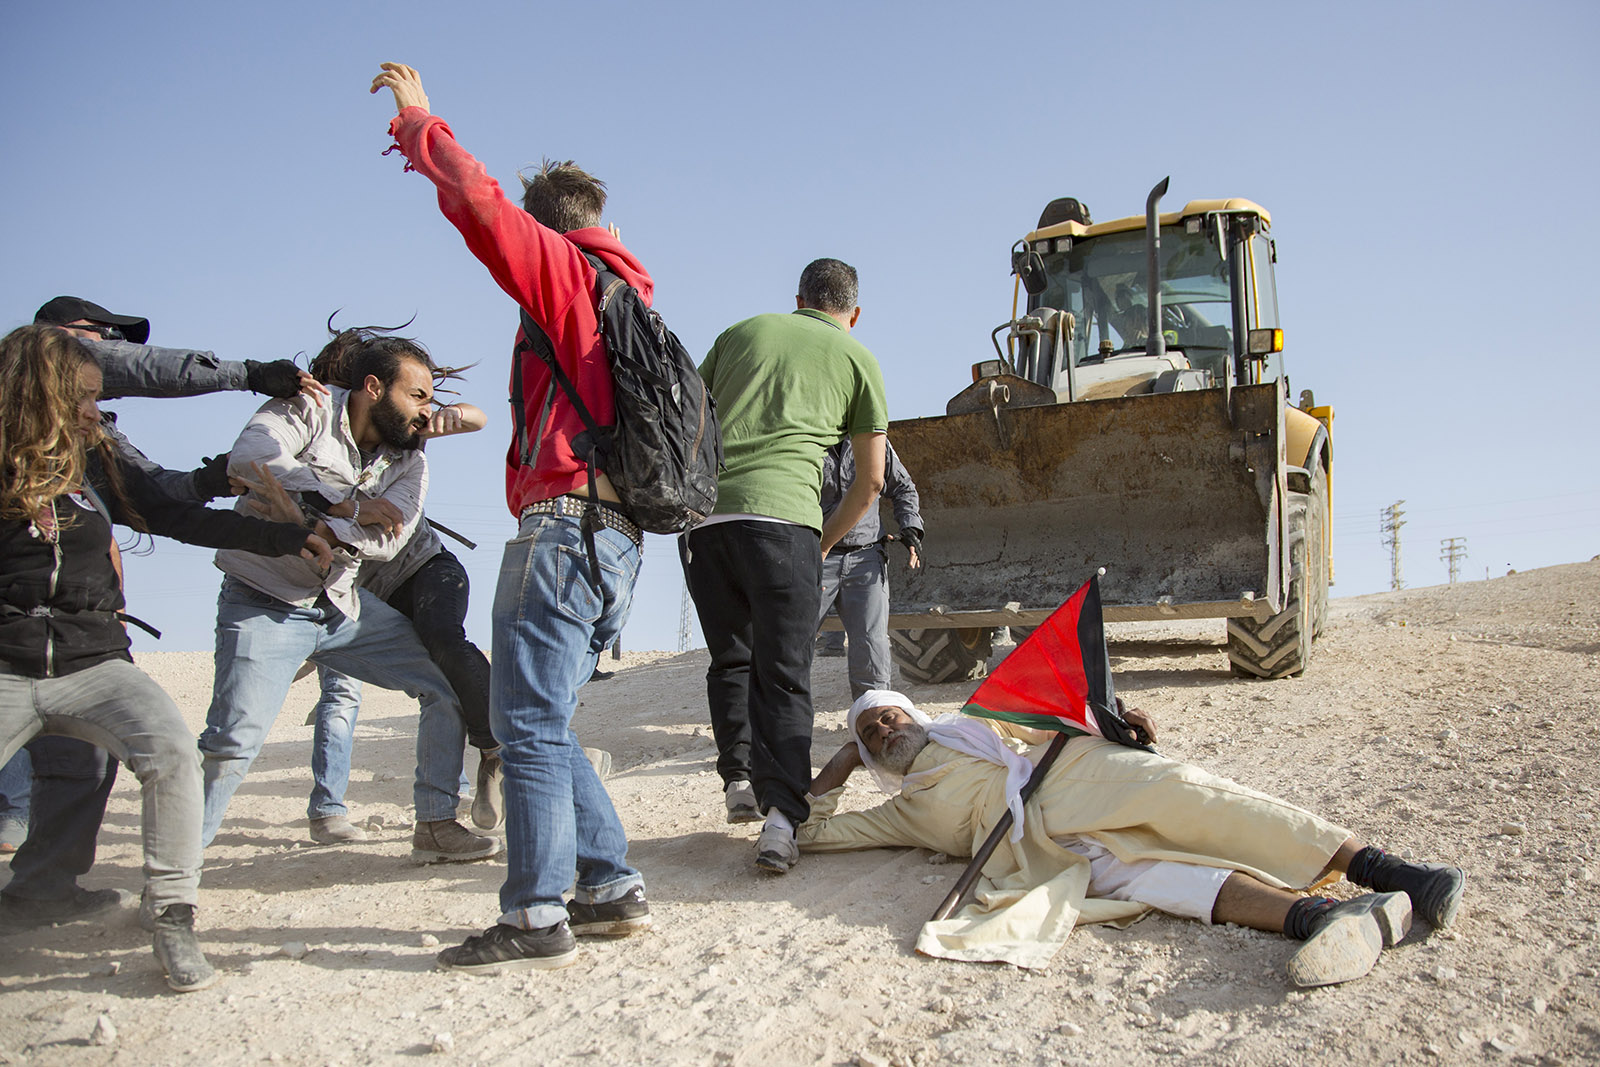 Villagers and activists facing arrest for protesting the attempted demolition of Bedouin Palestinian dwellings at al-Khan al-Ahmar, West Bank, October 15, 2018